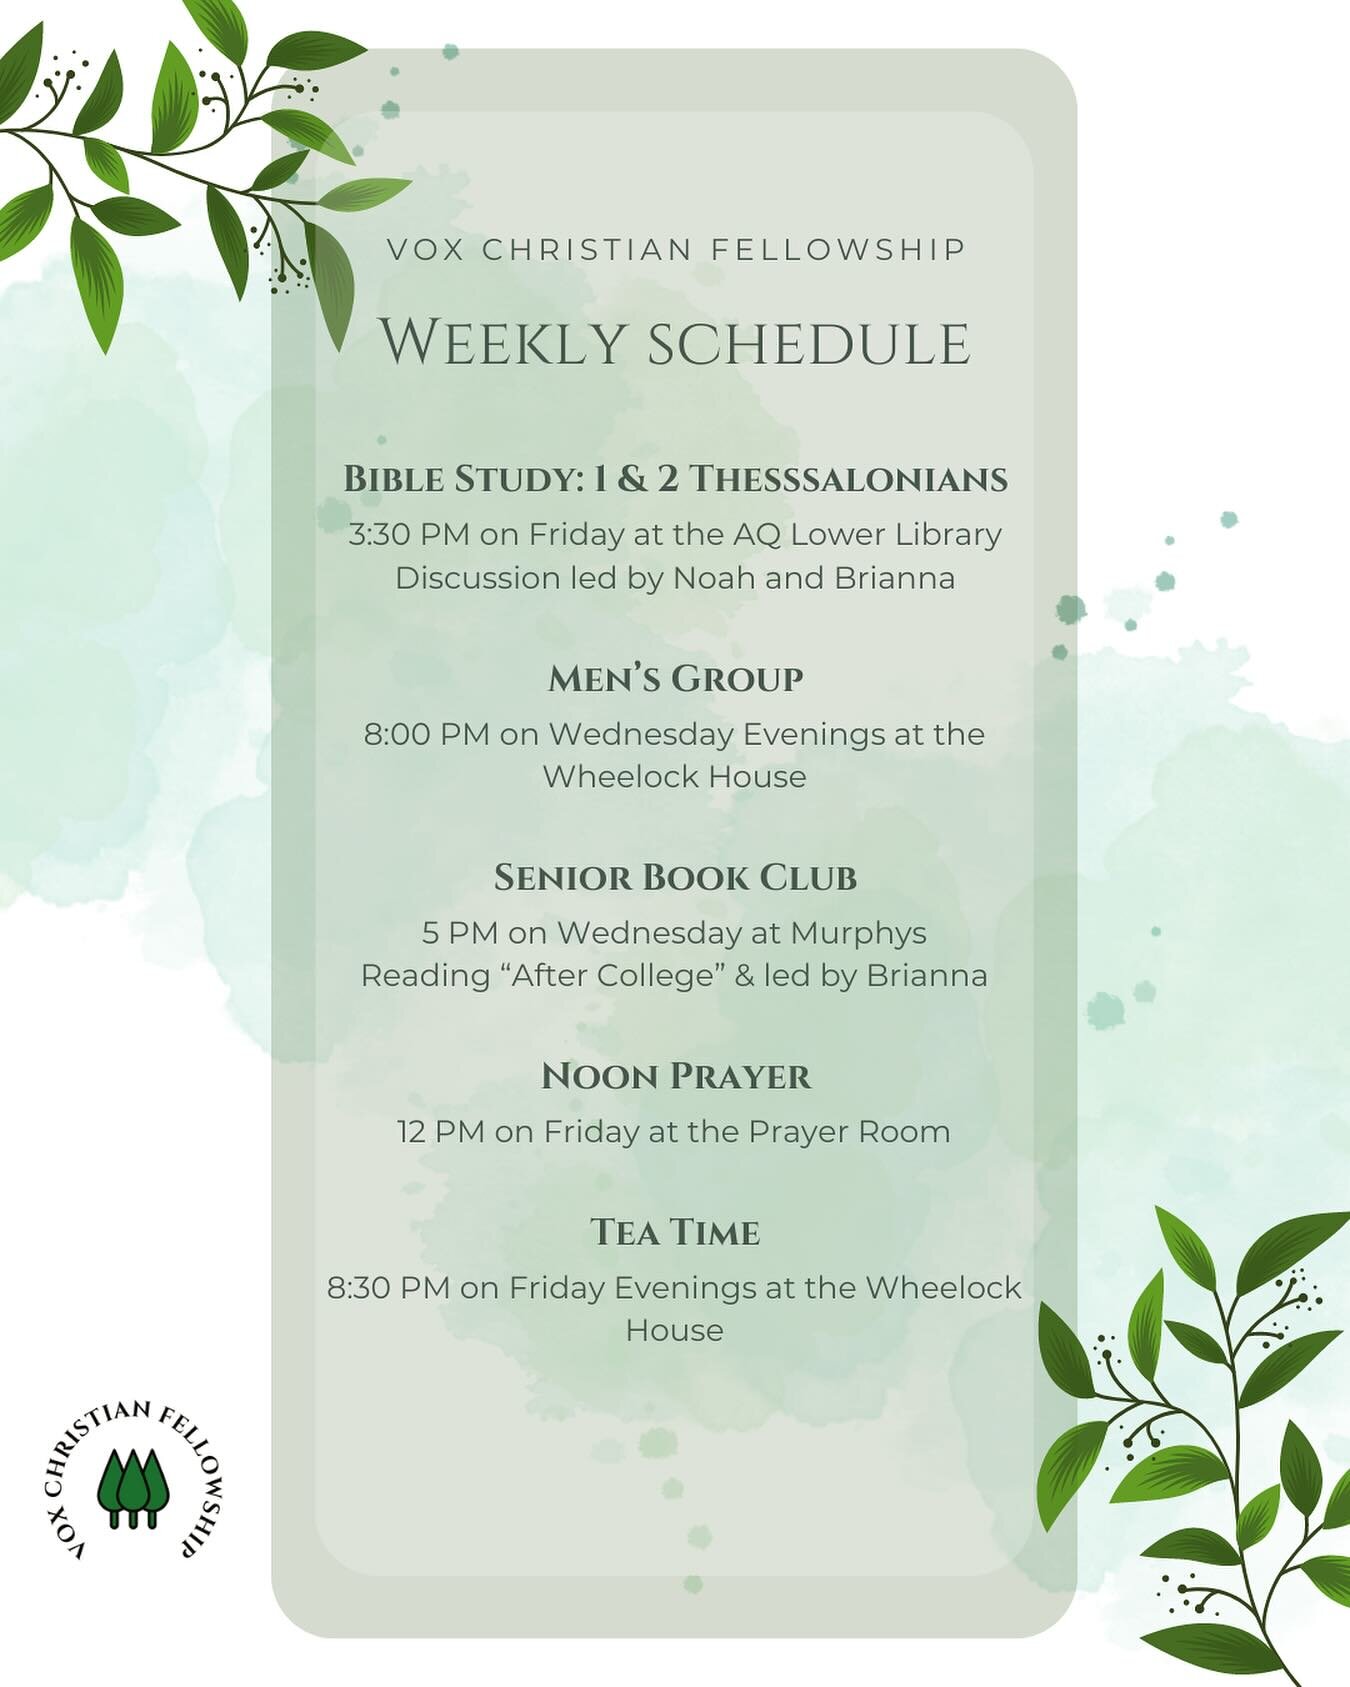 Our Spring Term Weekly Schedule! We hope you will join us for our variety of weekly events. We have been praying for YOU!